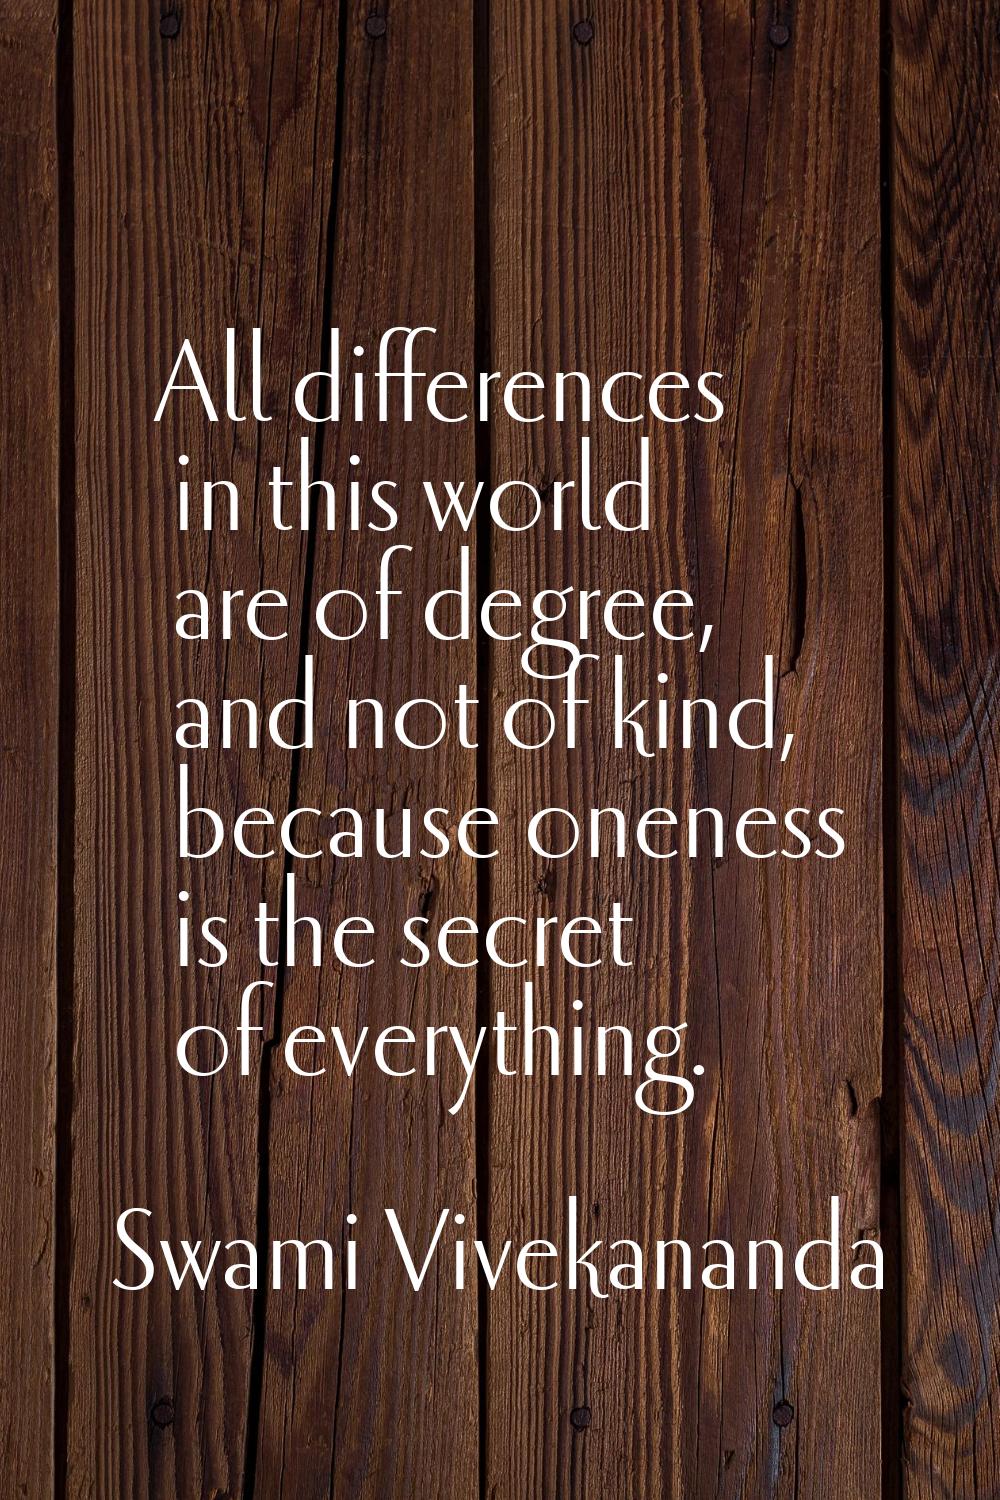 All differences in this world are of degree, and not of kind, because oneness is the secret of ever